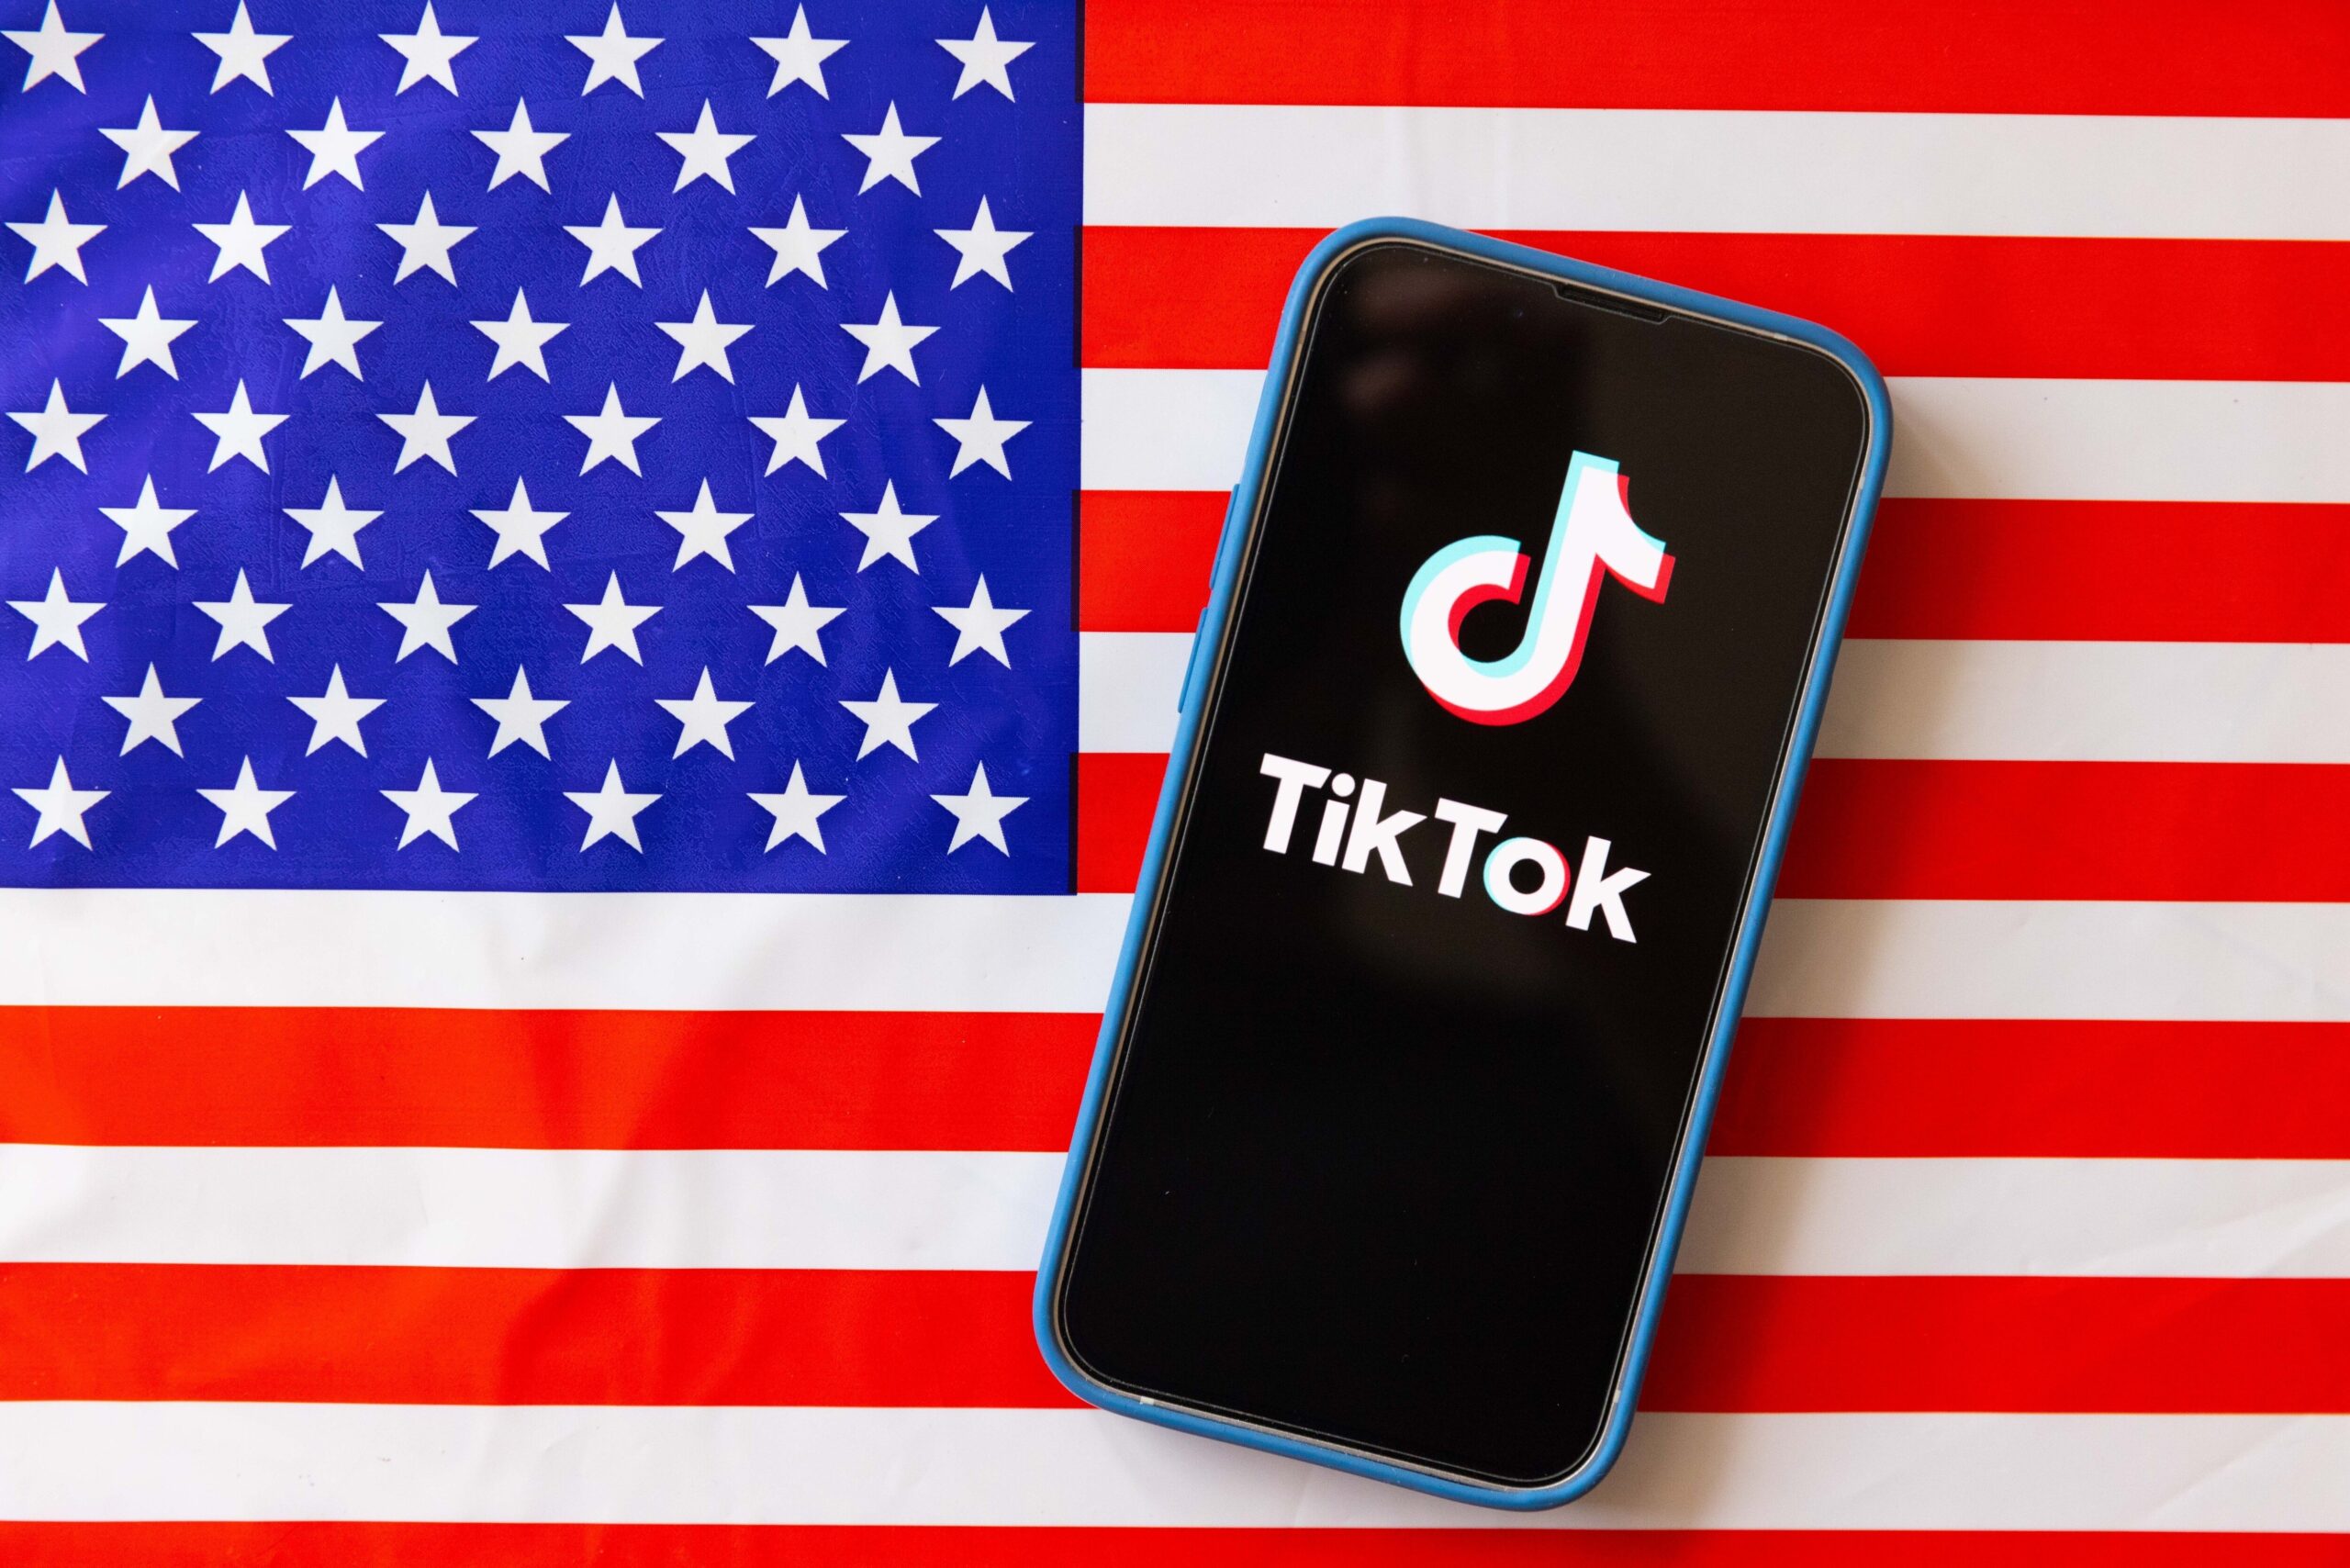 TIkTok logo on mobile phone with the American flag in the background.